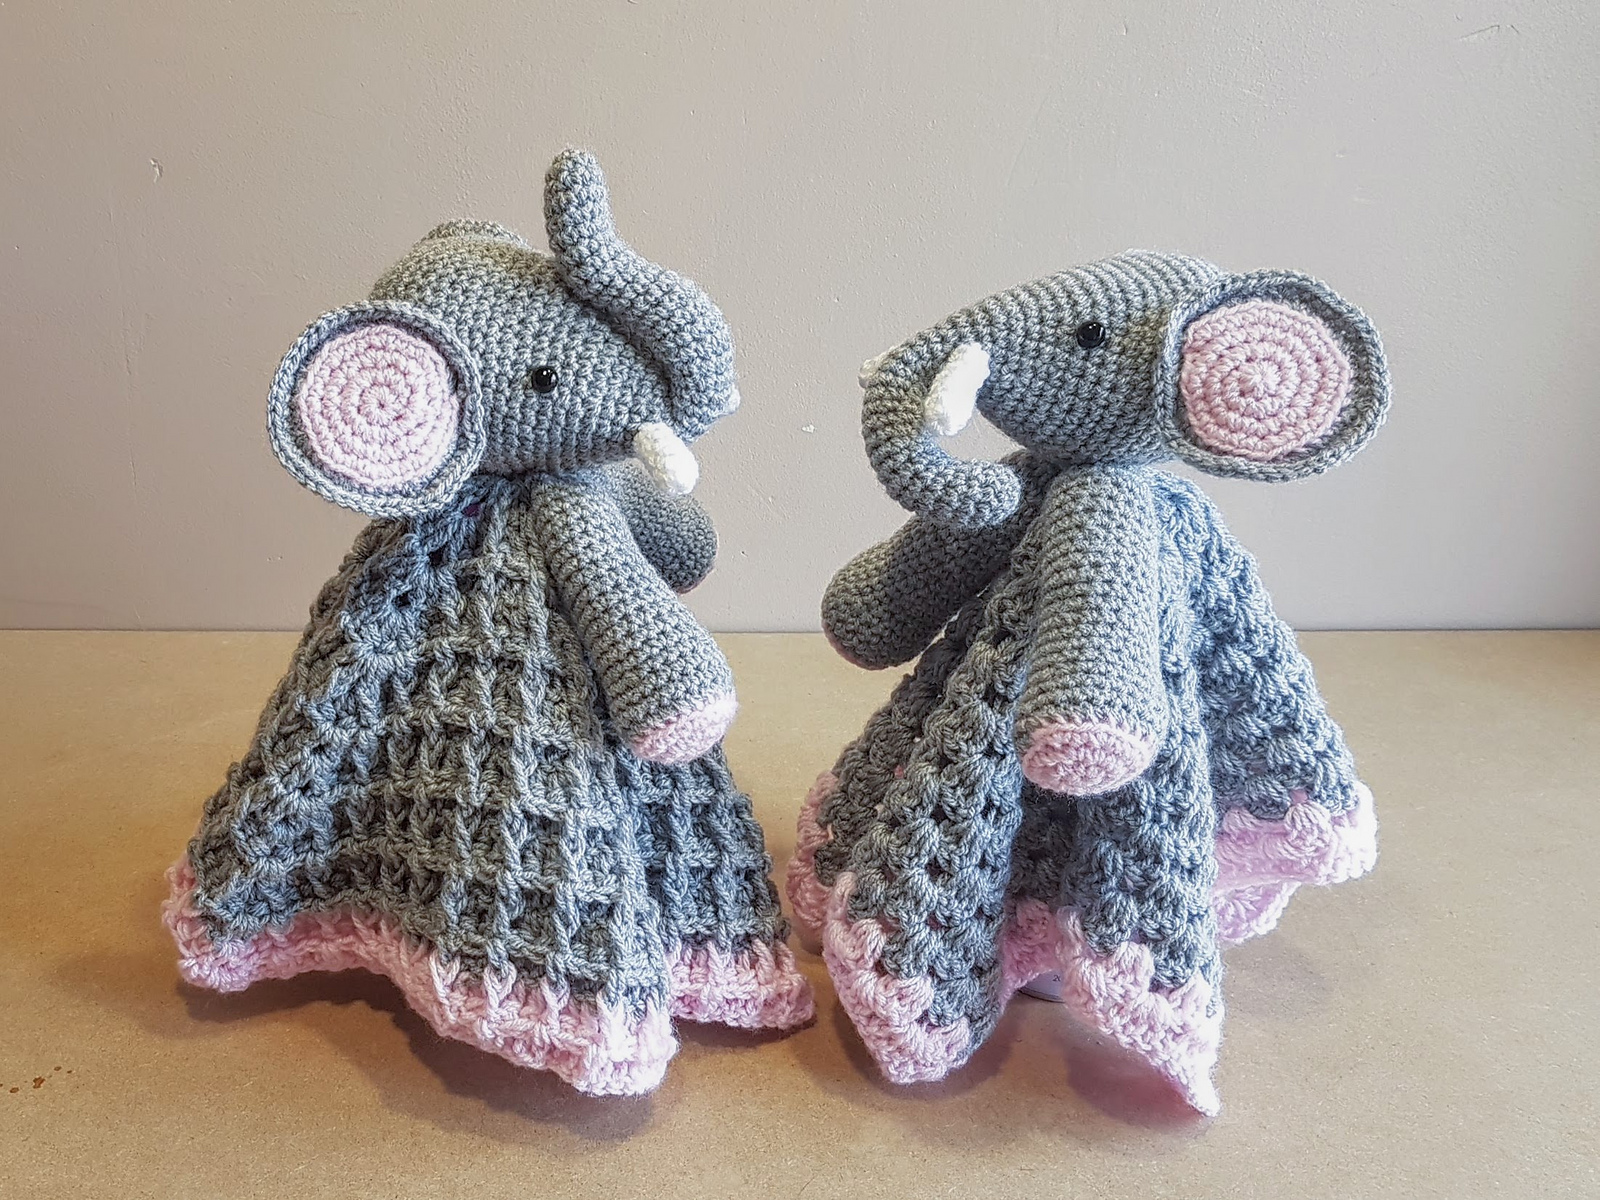 Adorable Elephant Lovey Crochet Pattern To Crochet A Forever Friend For Your Sweet Baby